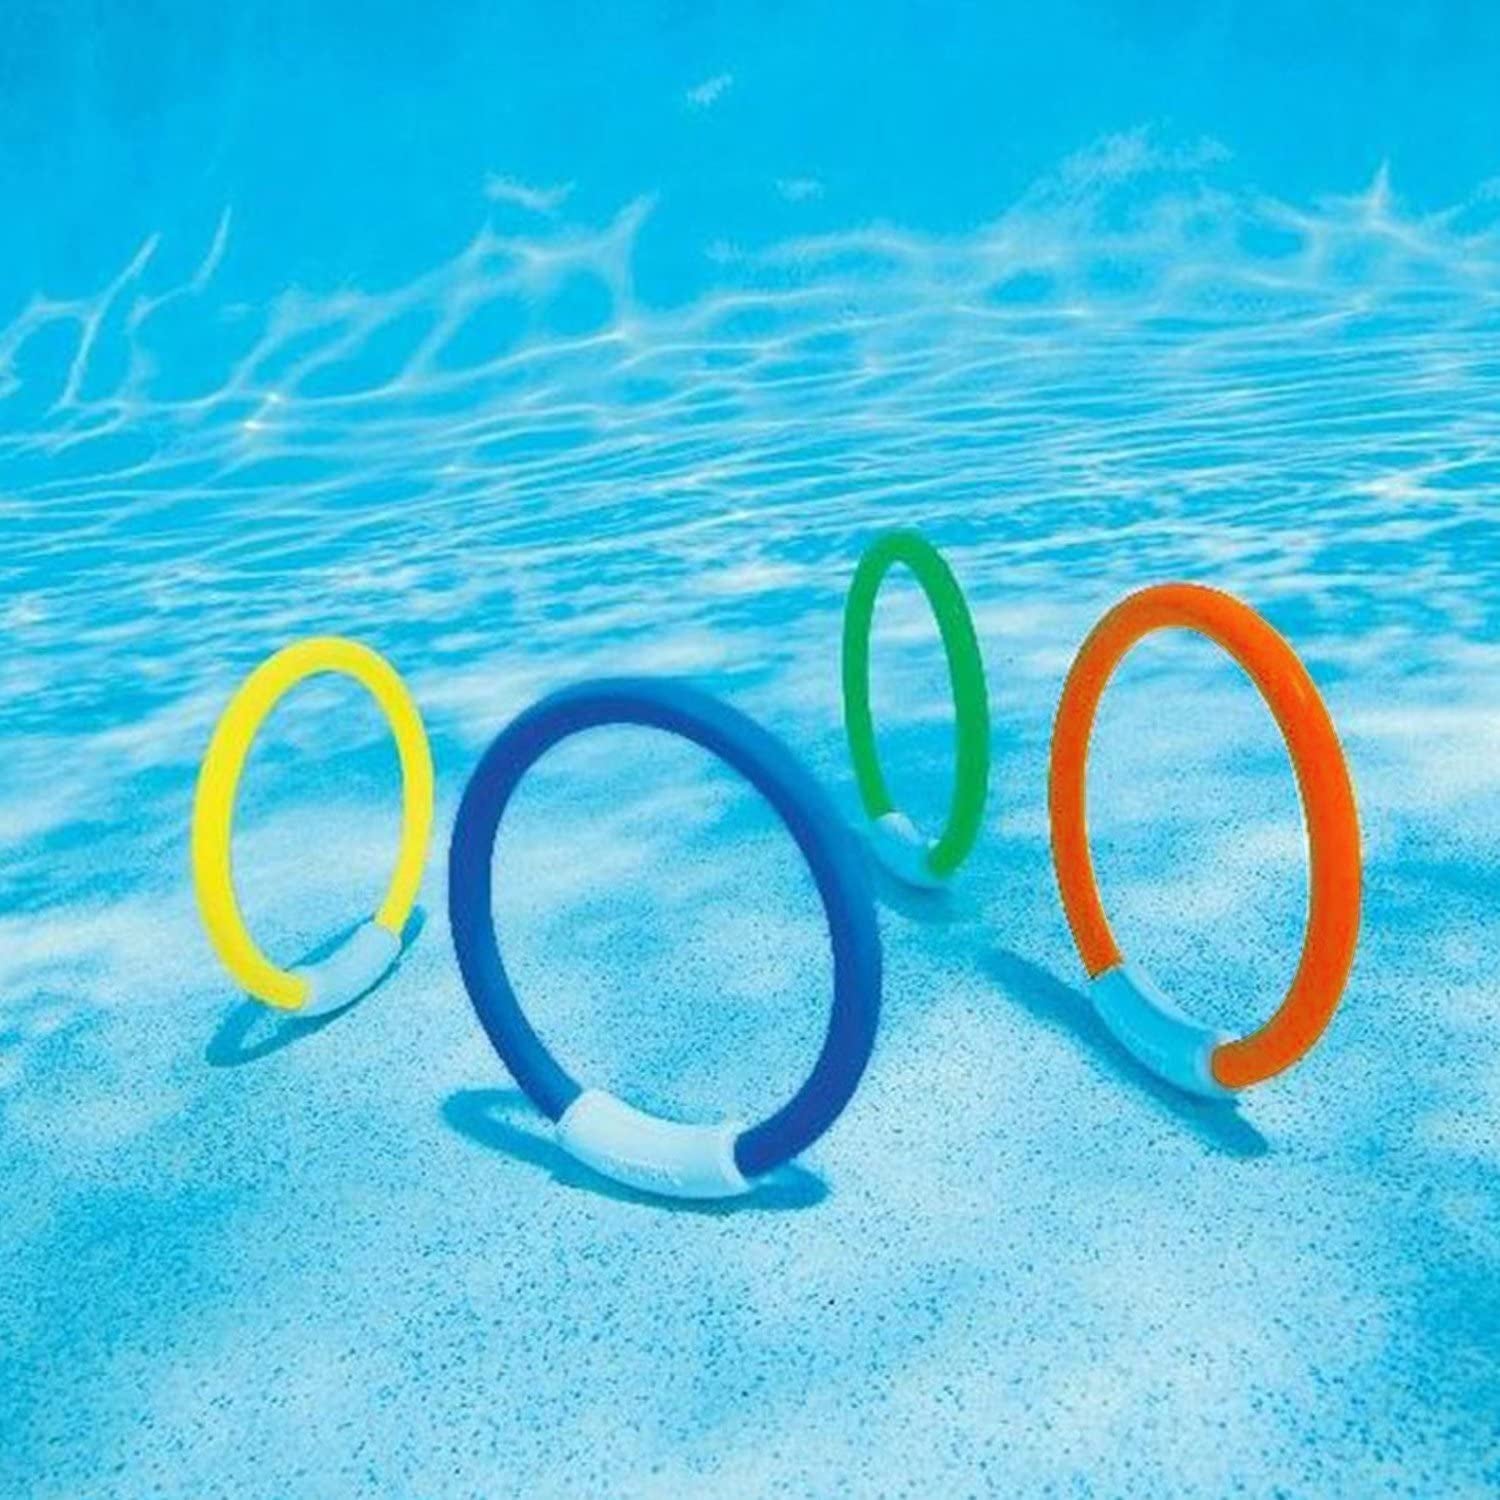 Underwater Pool Toys for Kids Ages 4-8, Summer Training Swim Pool Diving Toys Gift Set, Swimming Pool Toys for Kids Ages 8-12 for Fun Water Toys Games